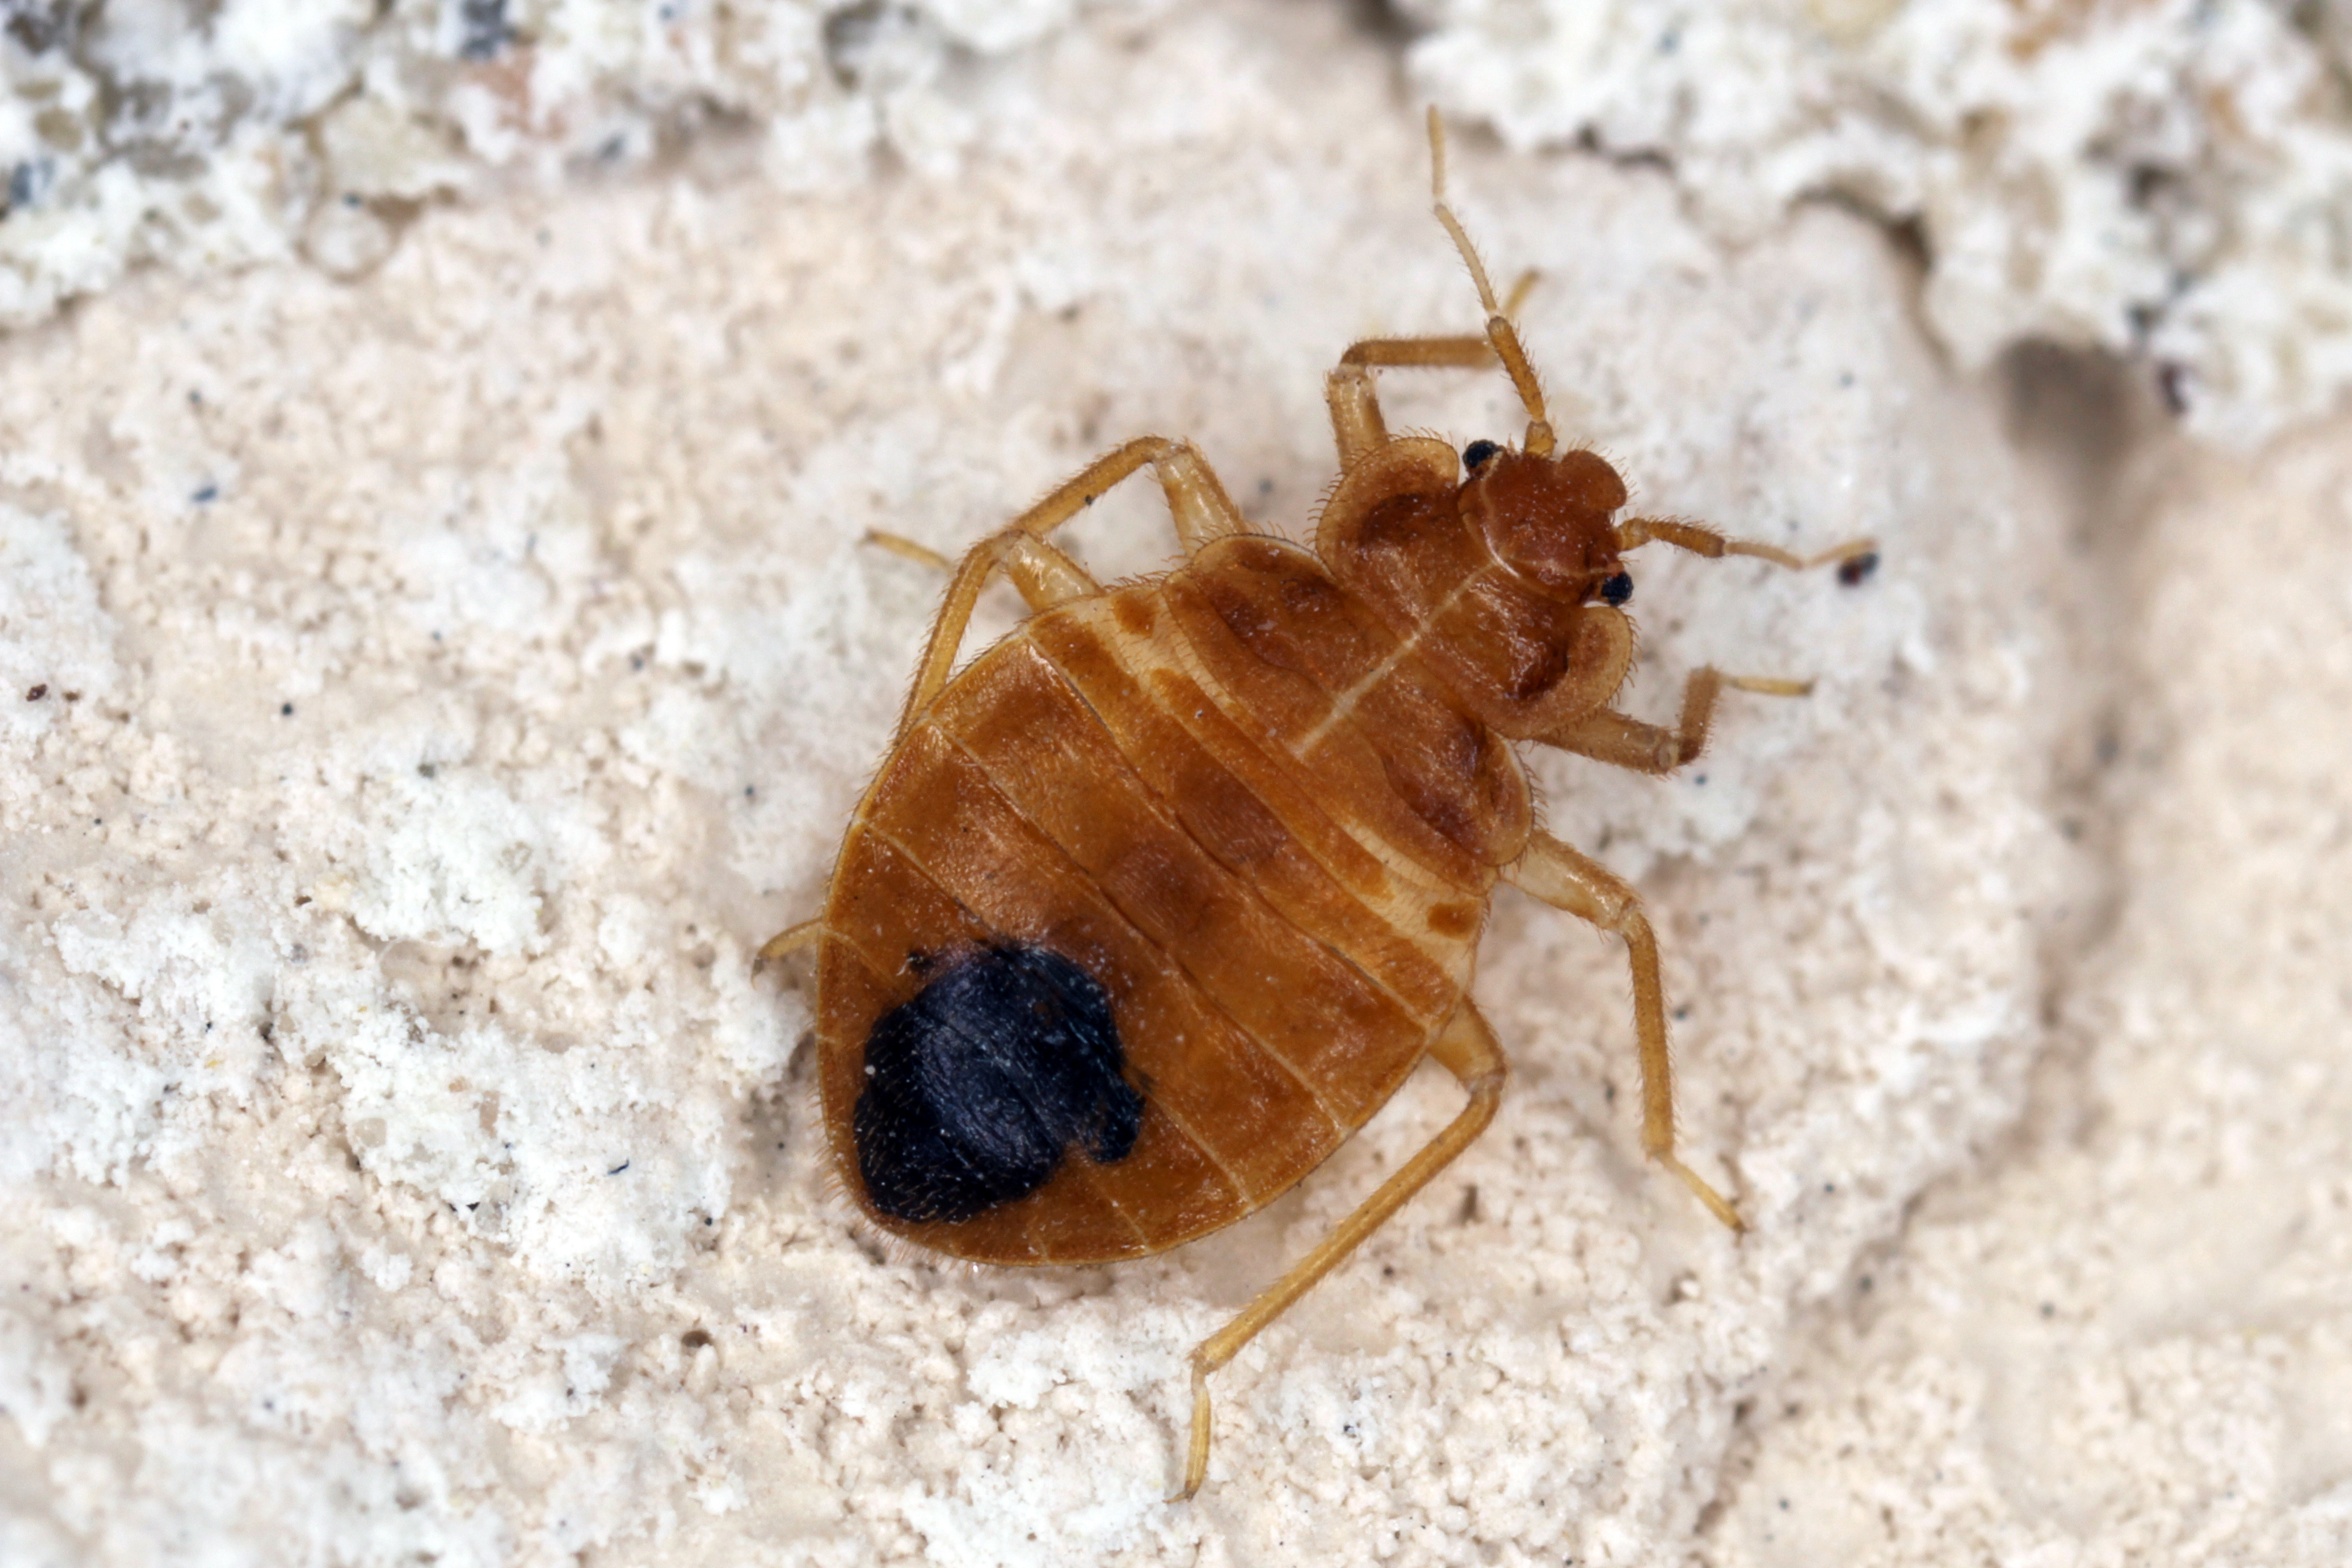 A close up shot of a bed bug - experience the best bed bug control in Killeen, TX with GGA Pest Management.